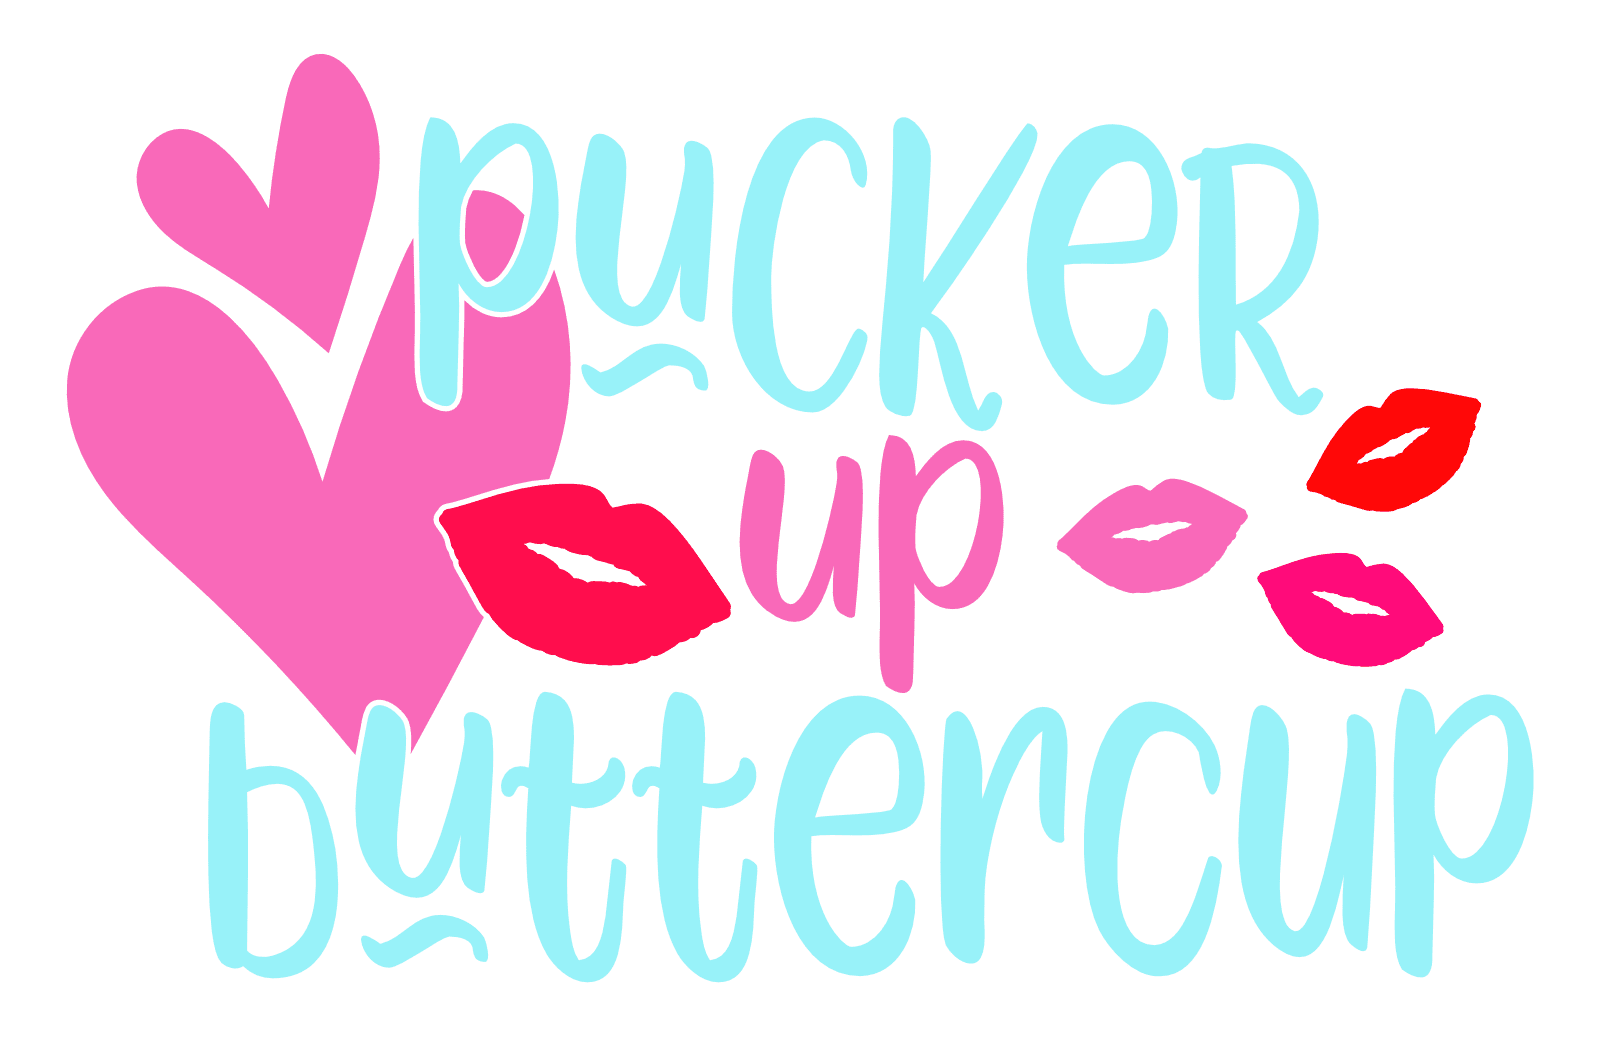 pucker-up-buttercup-funny-sayings-free-svg-file-SvgHeart.Com